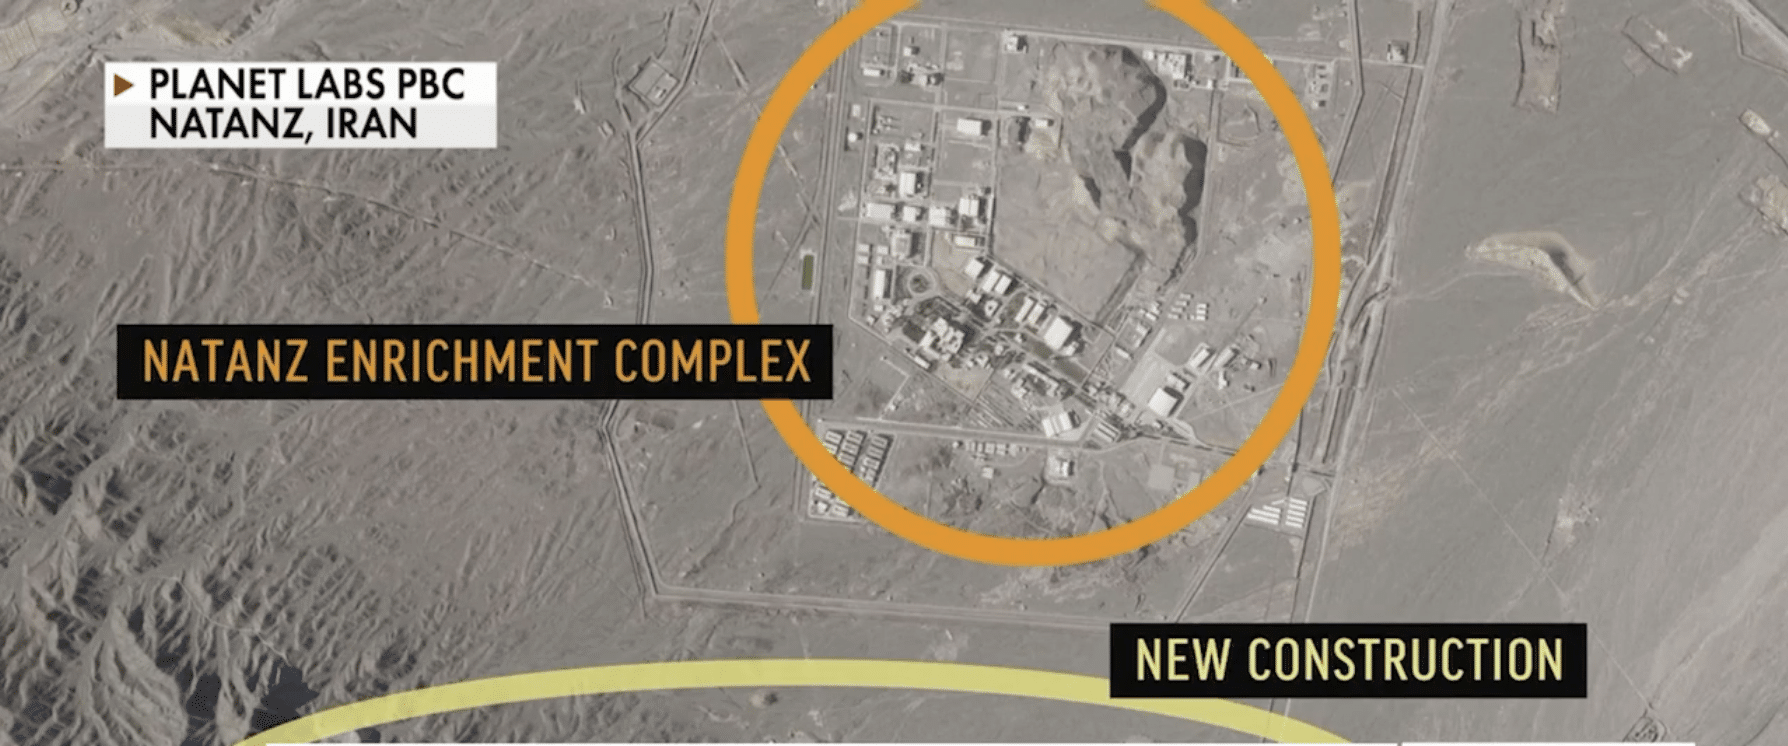 New intel reveals that Iran is moving toward possible atom bomb test in defiance of Western sanctions